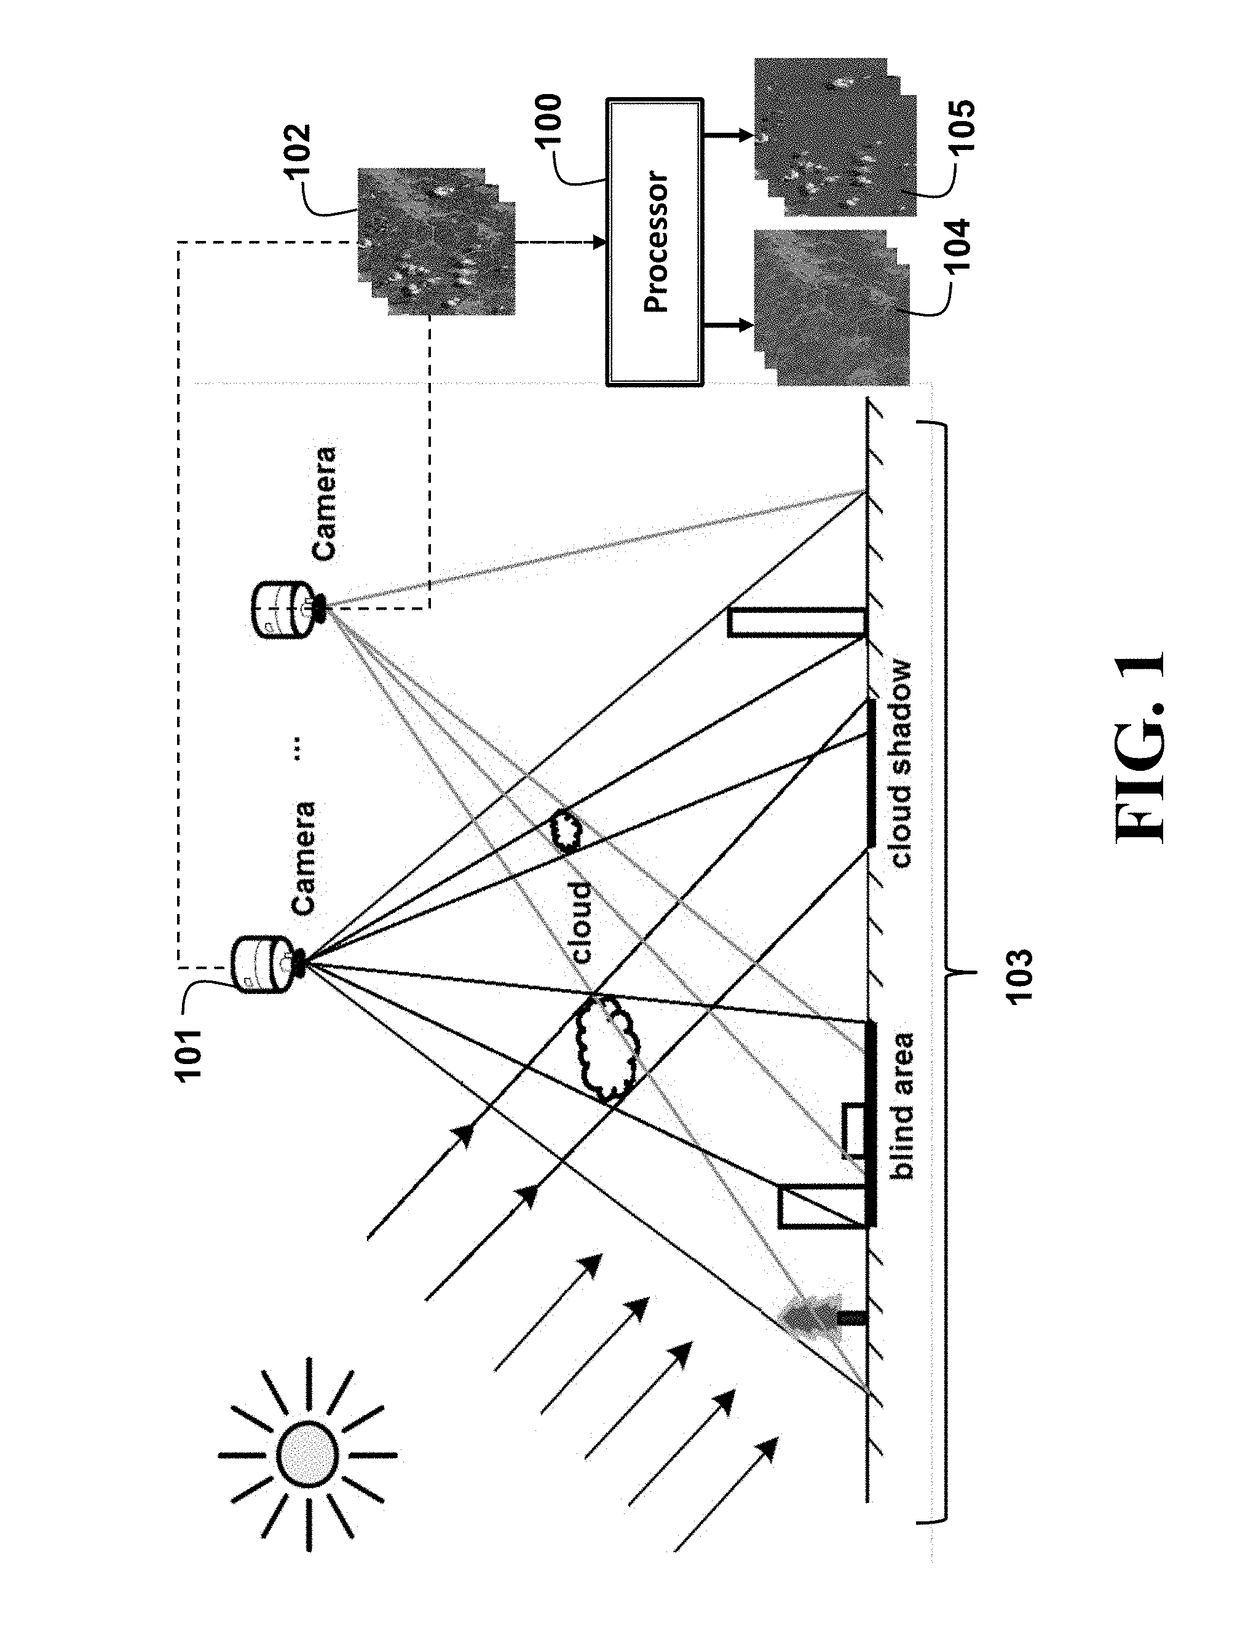 System and method for processing images using online tensor robust principal component analysis